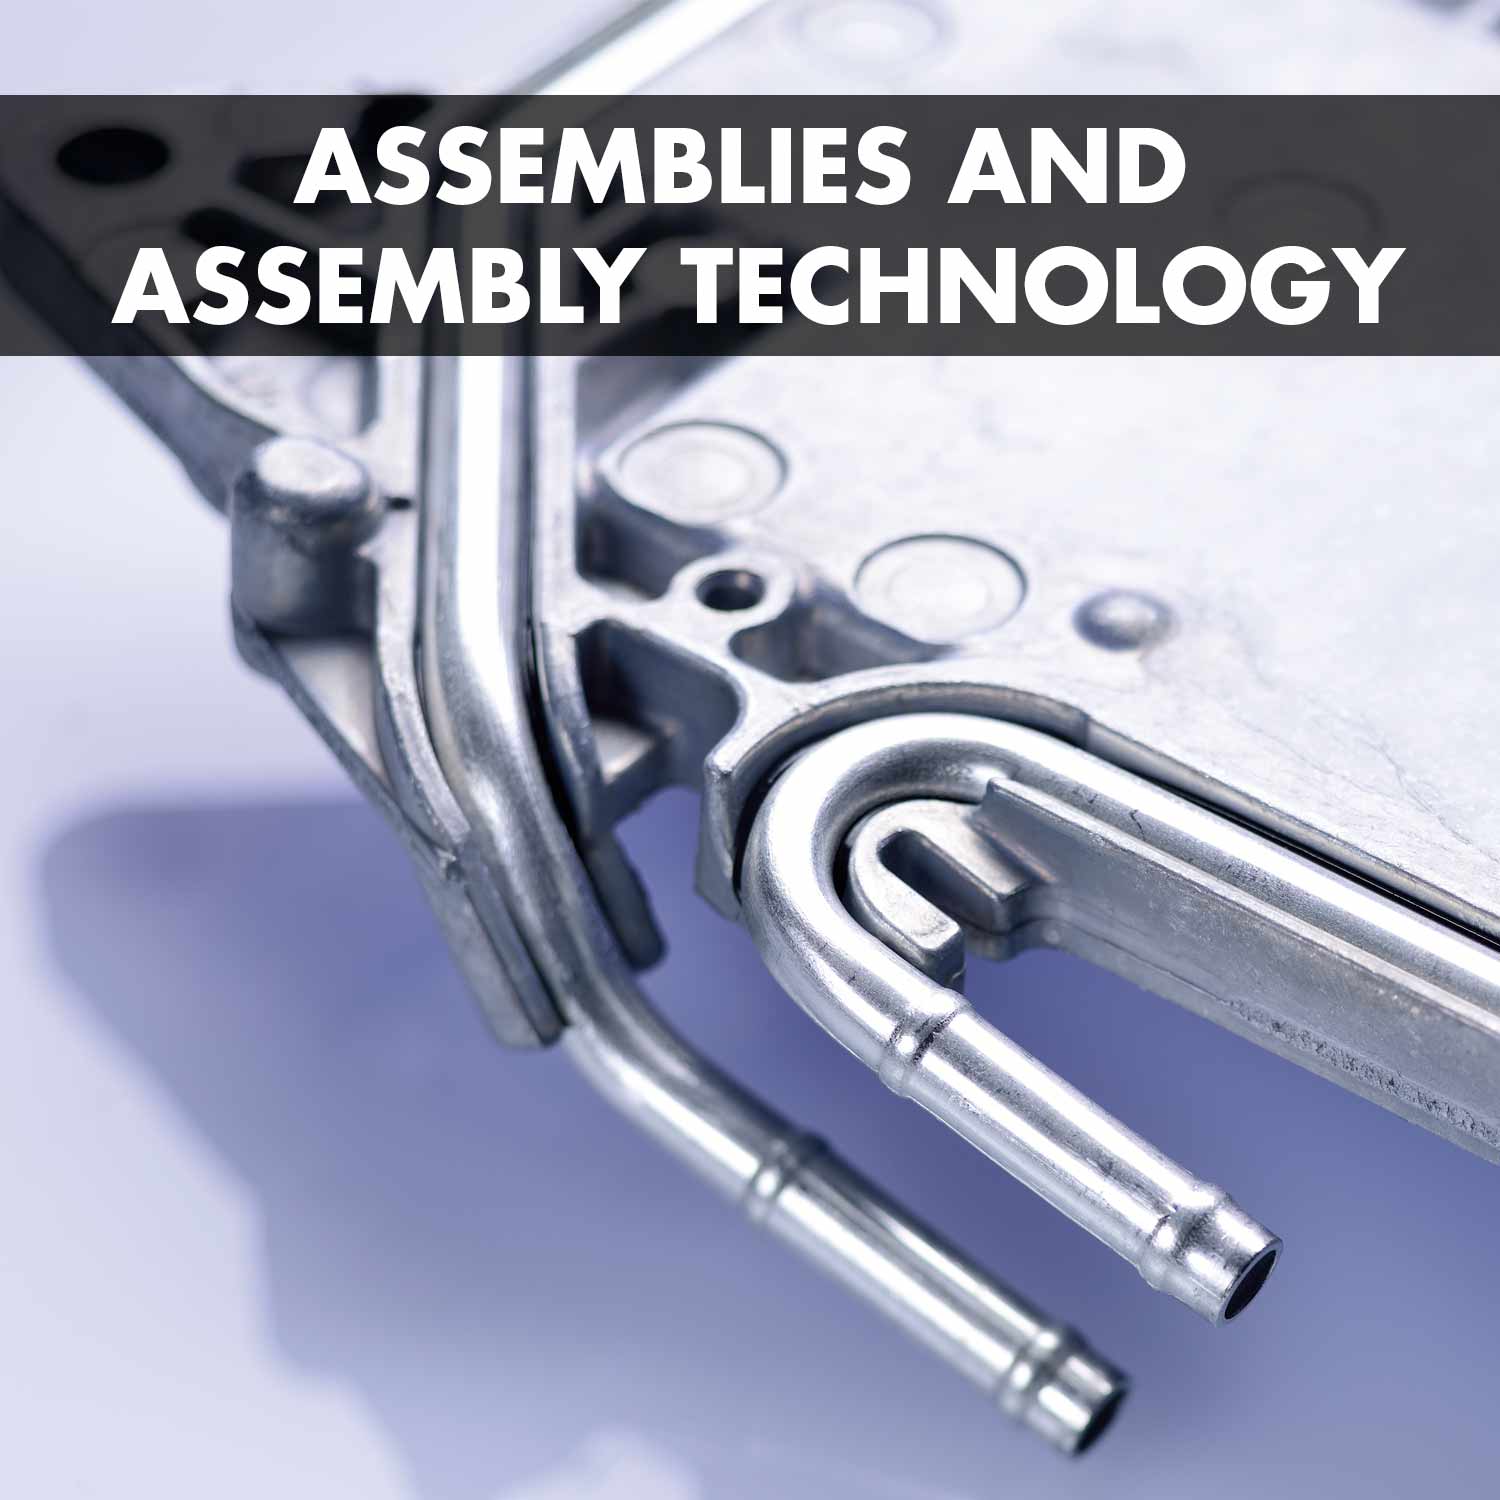 Component assemblies and assembly technology: Upstream and downstream process steps in combination with our technologies.